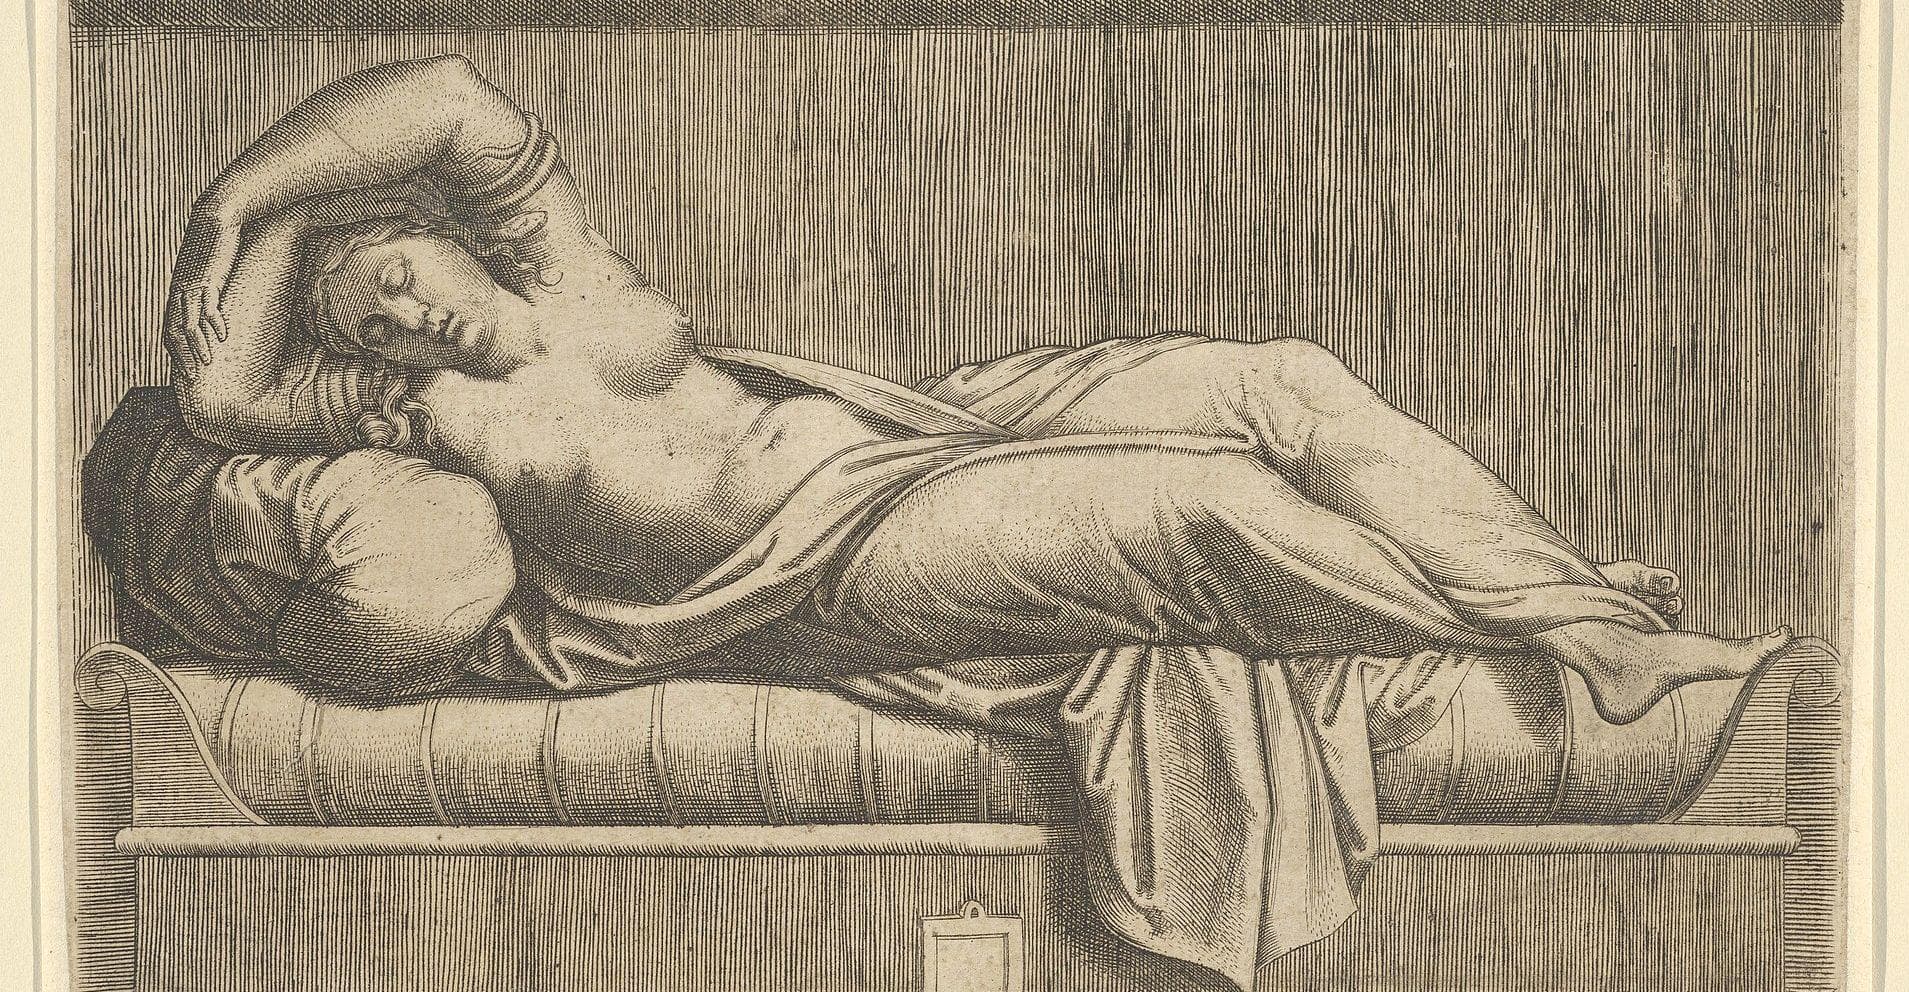 Untangling The Real Details Of Cleopatra's Epic And Mythic Sex Life